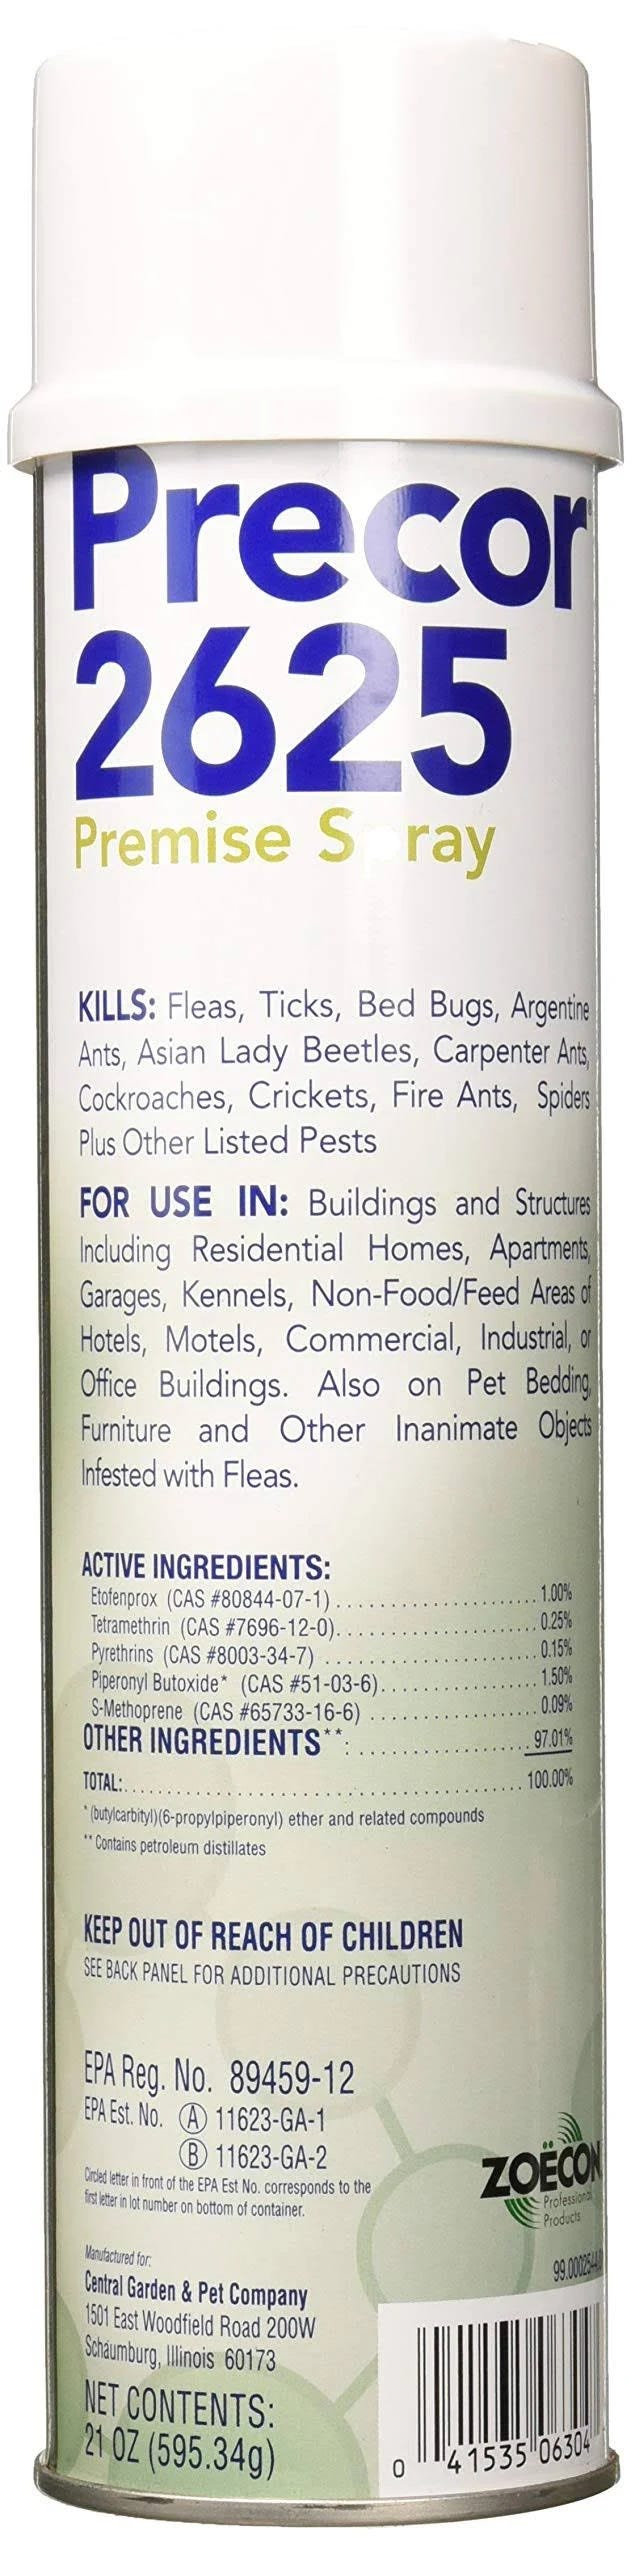 Precor 2625 Premise Spray: Broad Label Roach Spray for Homes and Pest Control | Image